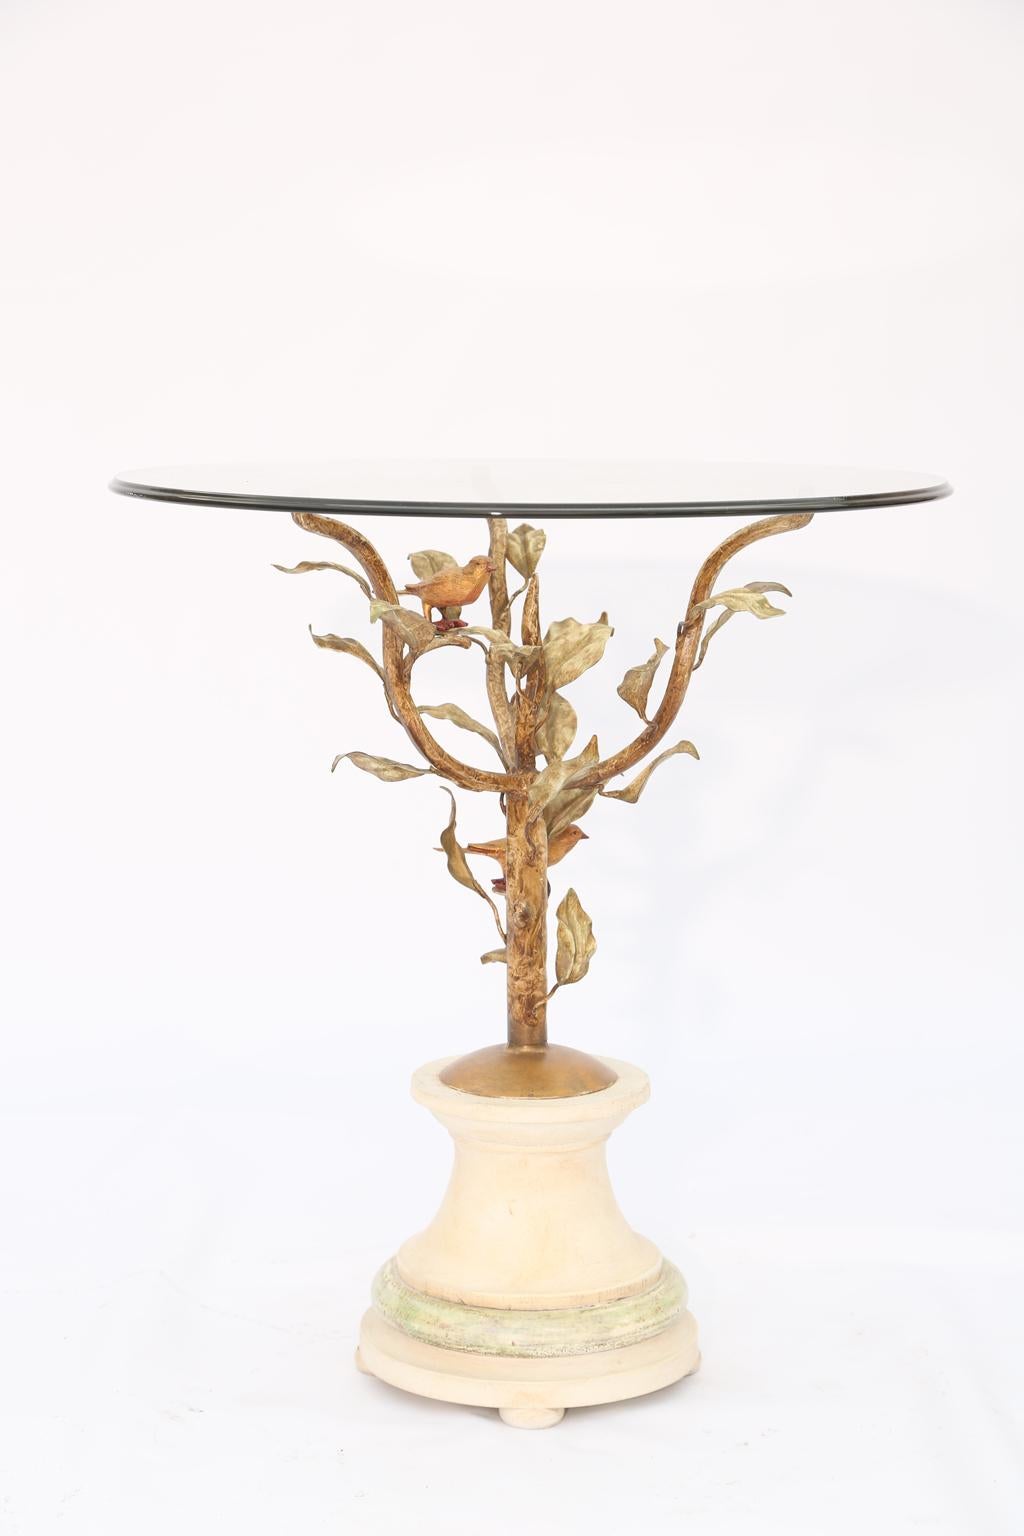 Side or end table, in the manner of Diego Giacometti, having a round top of glass, on frame of gilded iron, its arms formed as leafy branches with birds perched atop, round, painted wooden foot base. 

Stock ID: D1663.